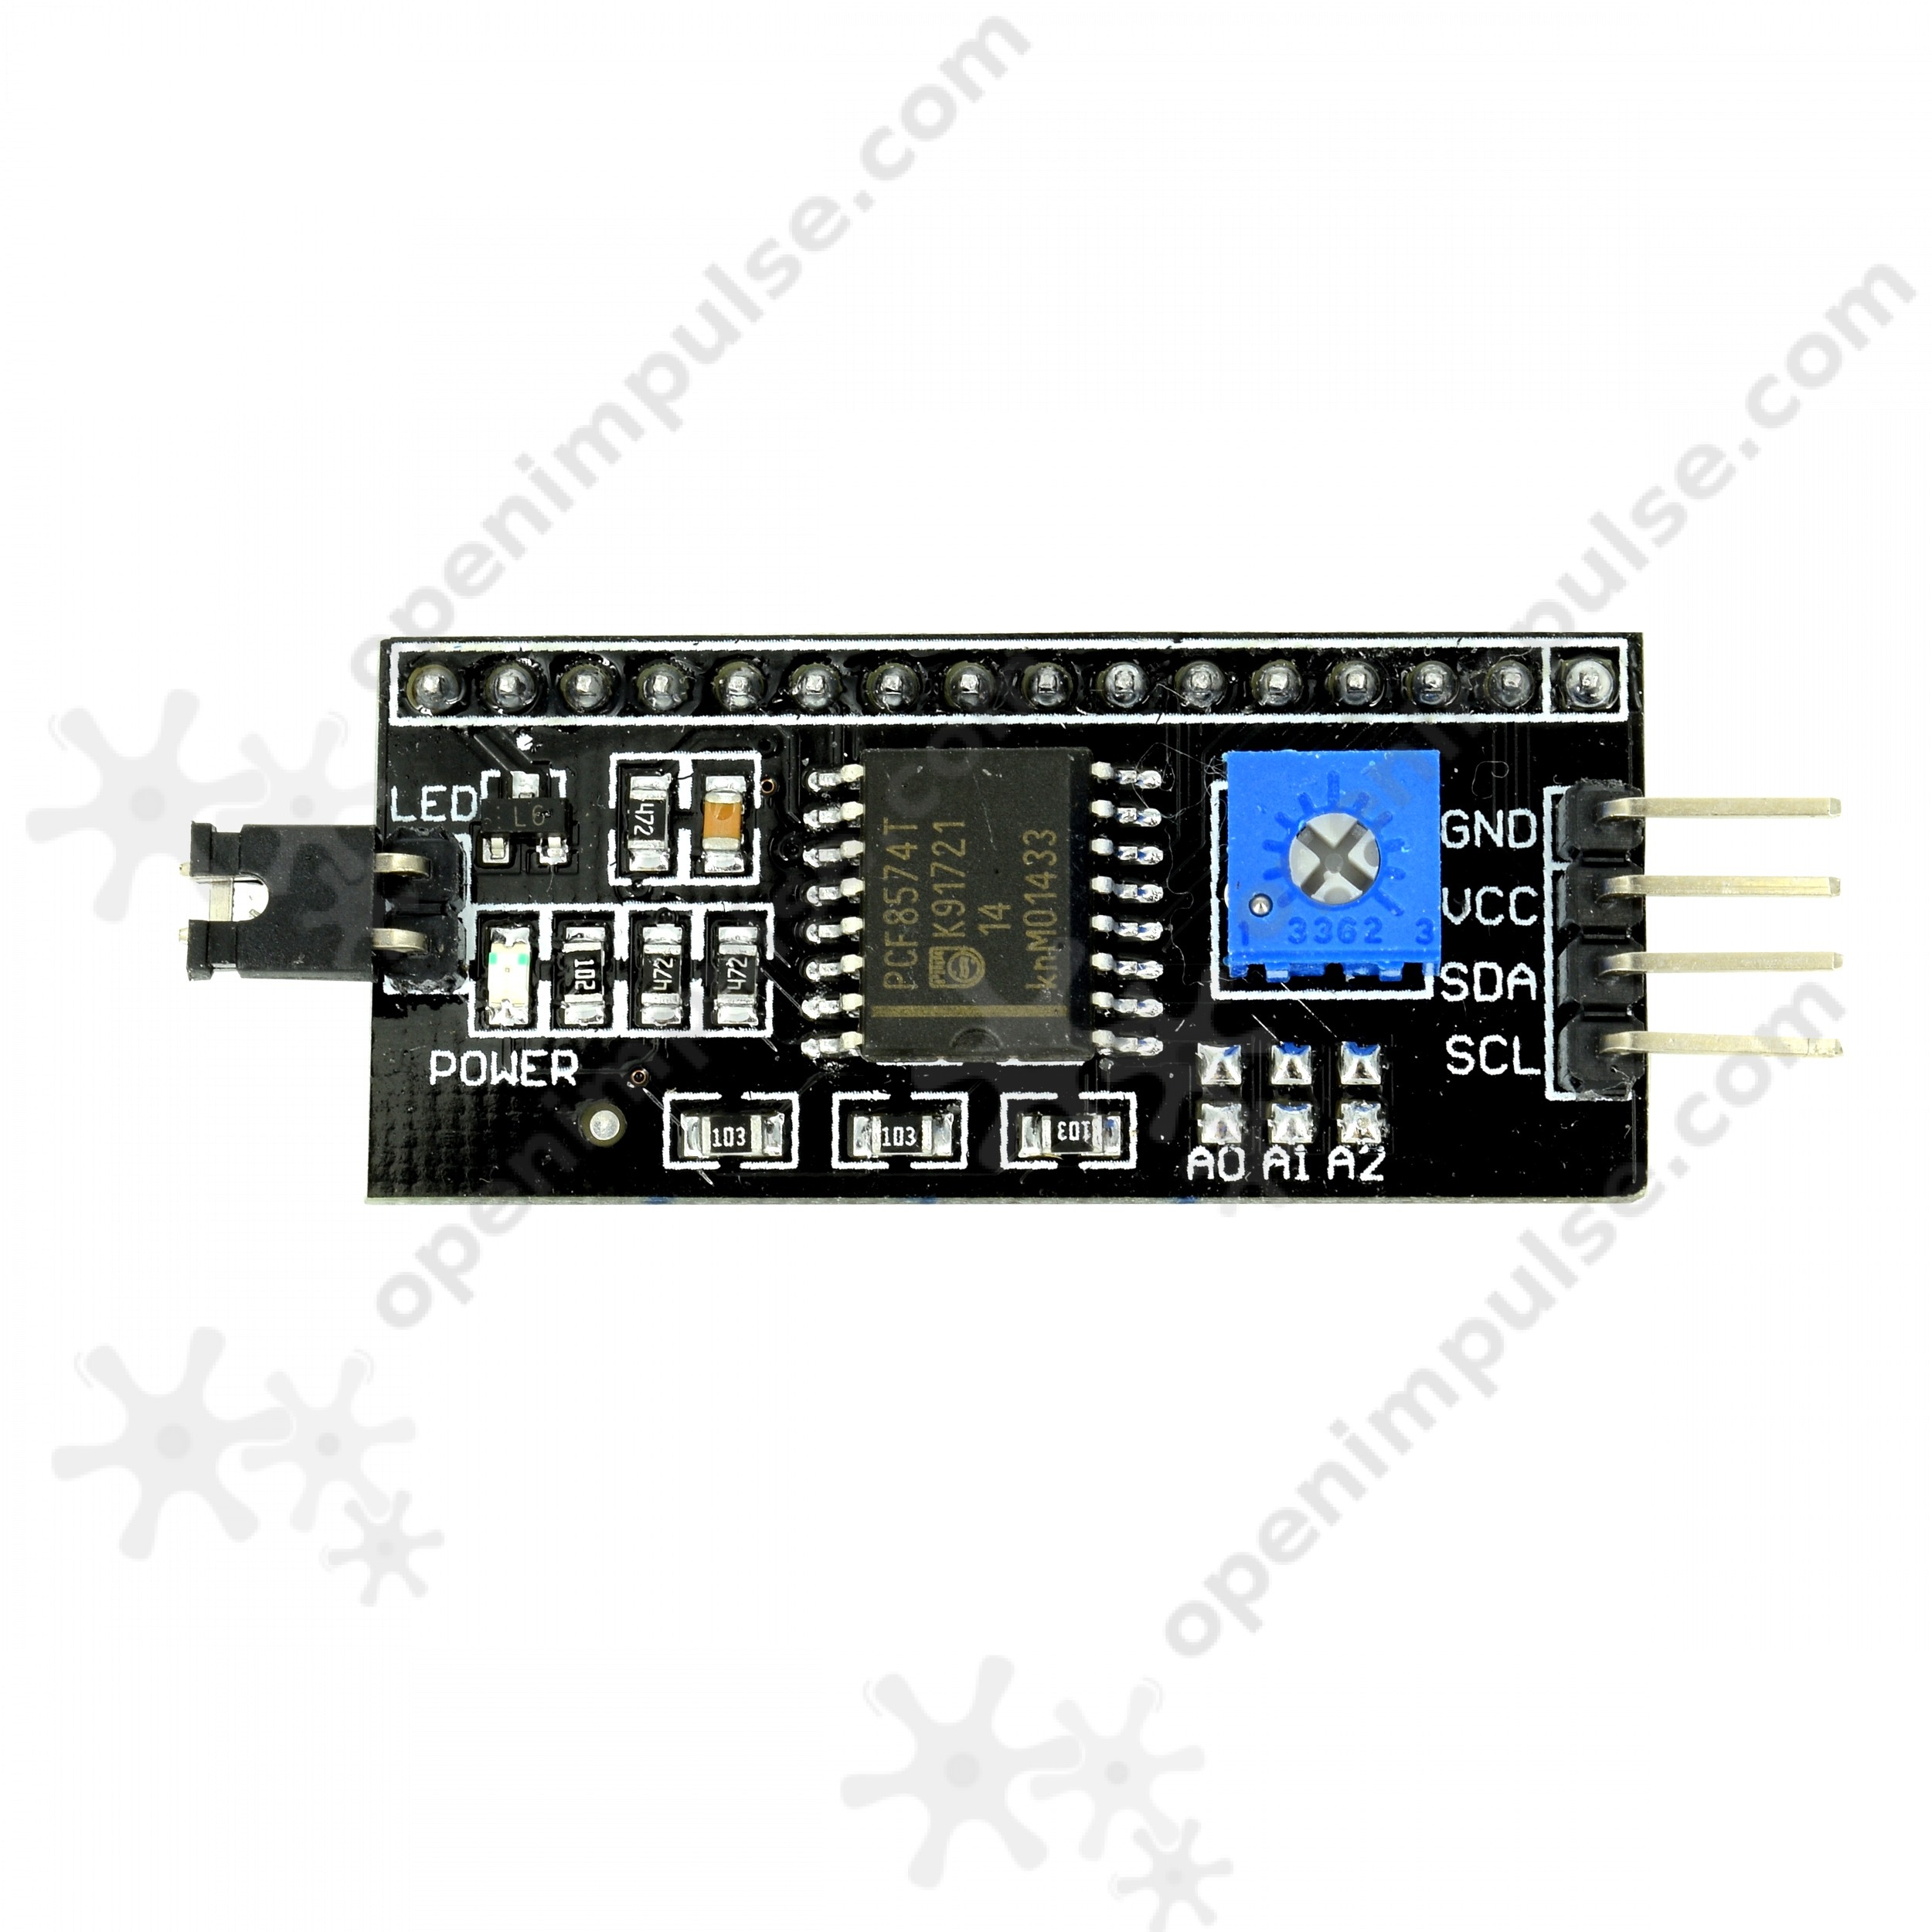 Compatible LCD Display 2.5″ (LCD 1602) (I2C communication)